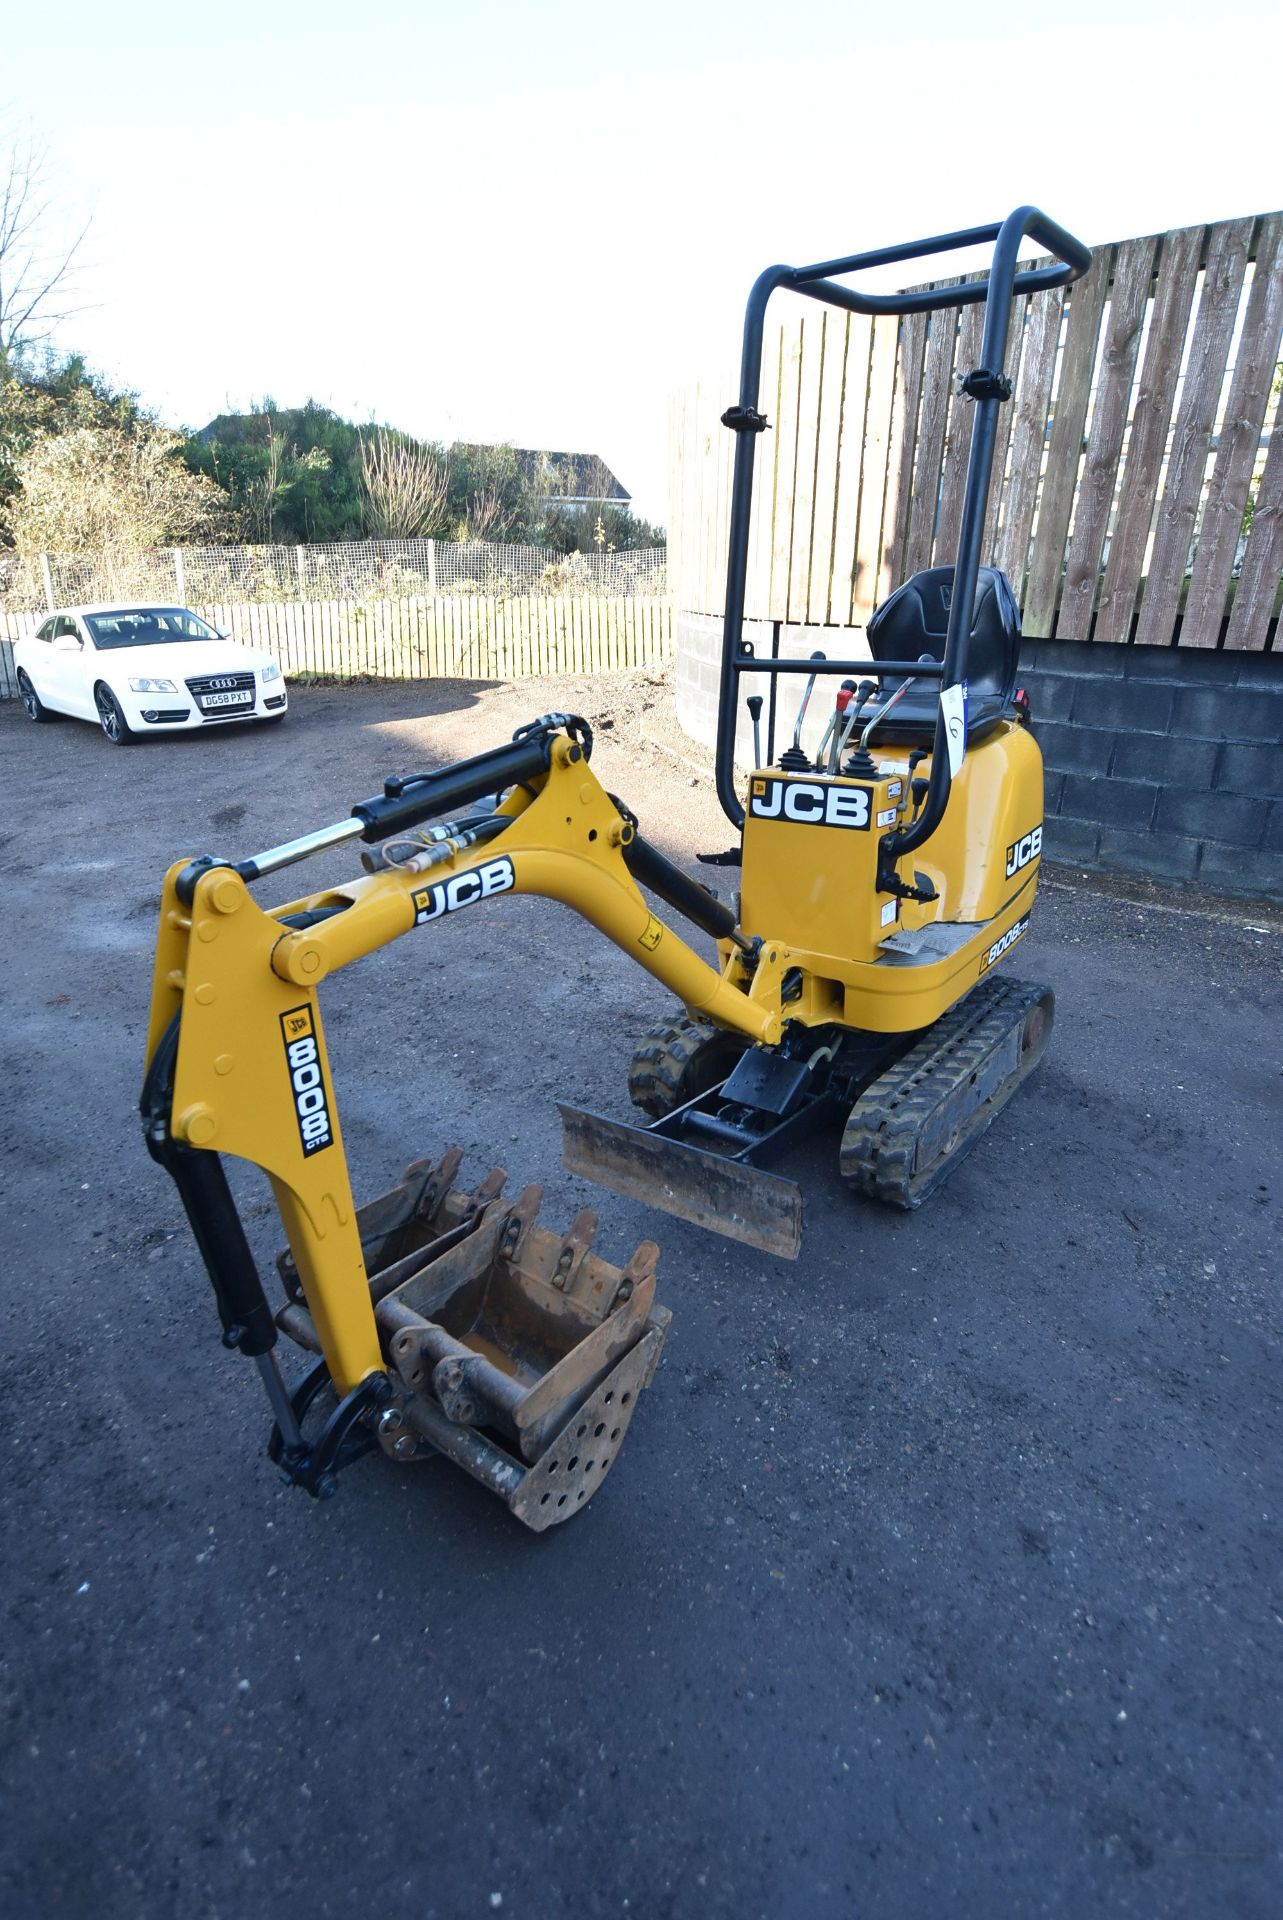 JCB 8008 CTS 950kg TRACKED COMPACT EXCAVATOR, serial no. 02410665, year of manufacture 2014,